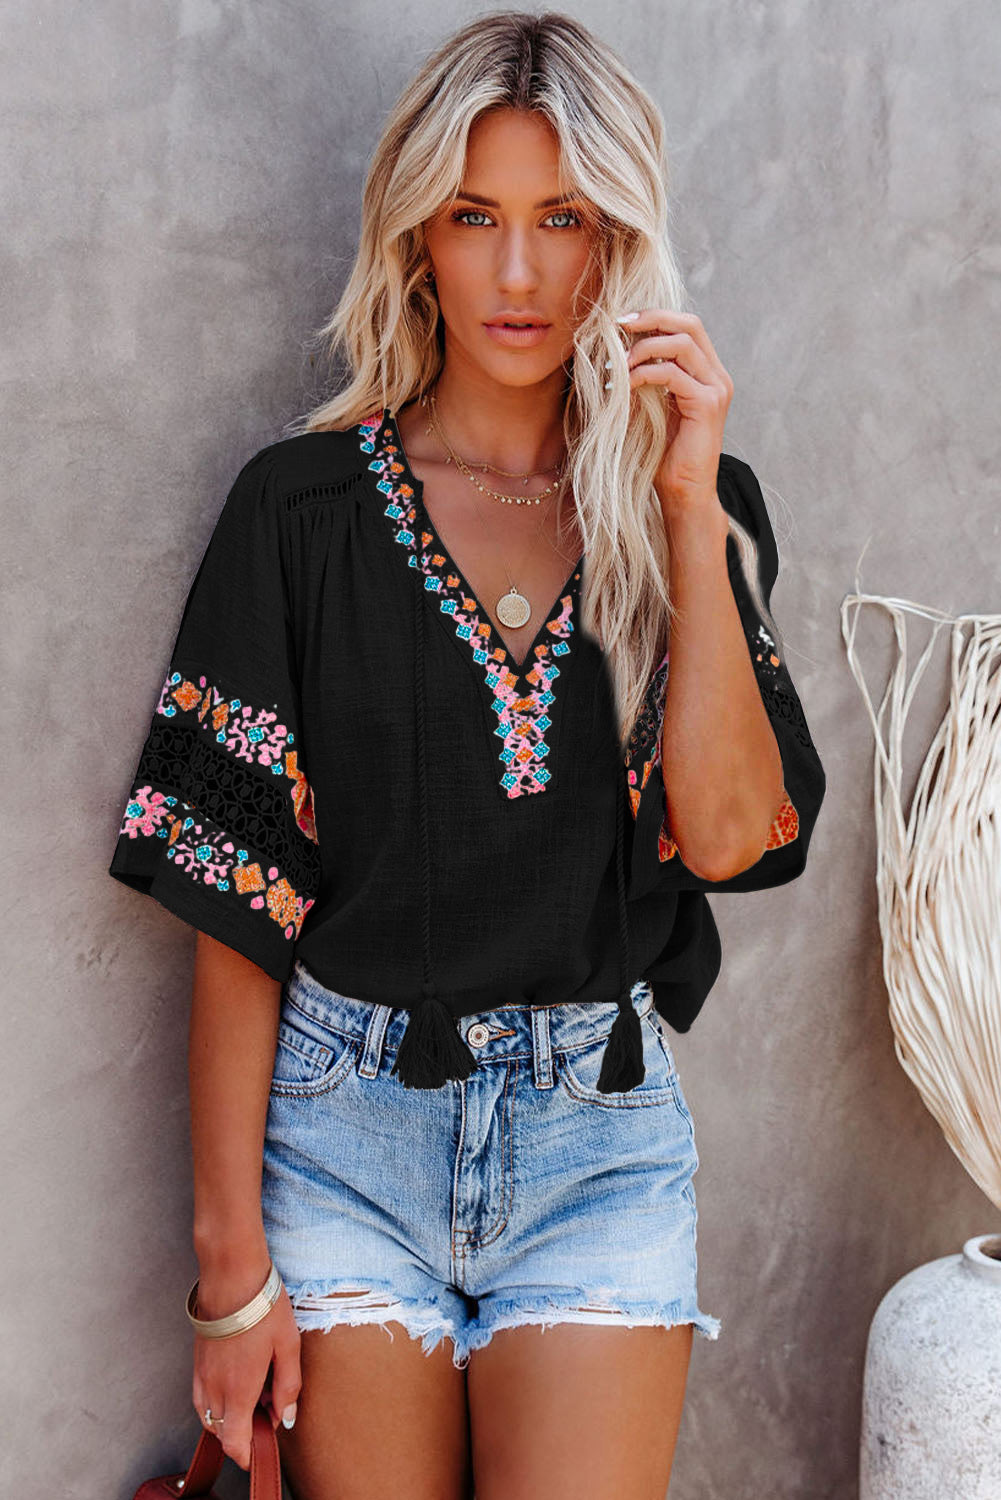 Black Boho Tassel Drawstring Cut Out Embroidered Blouse